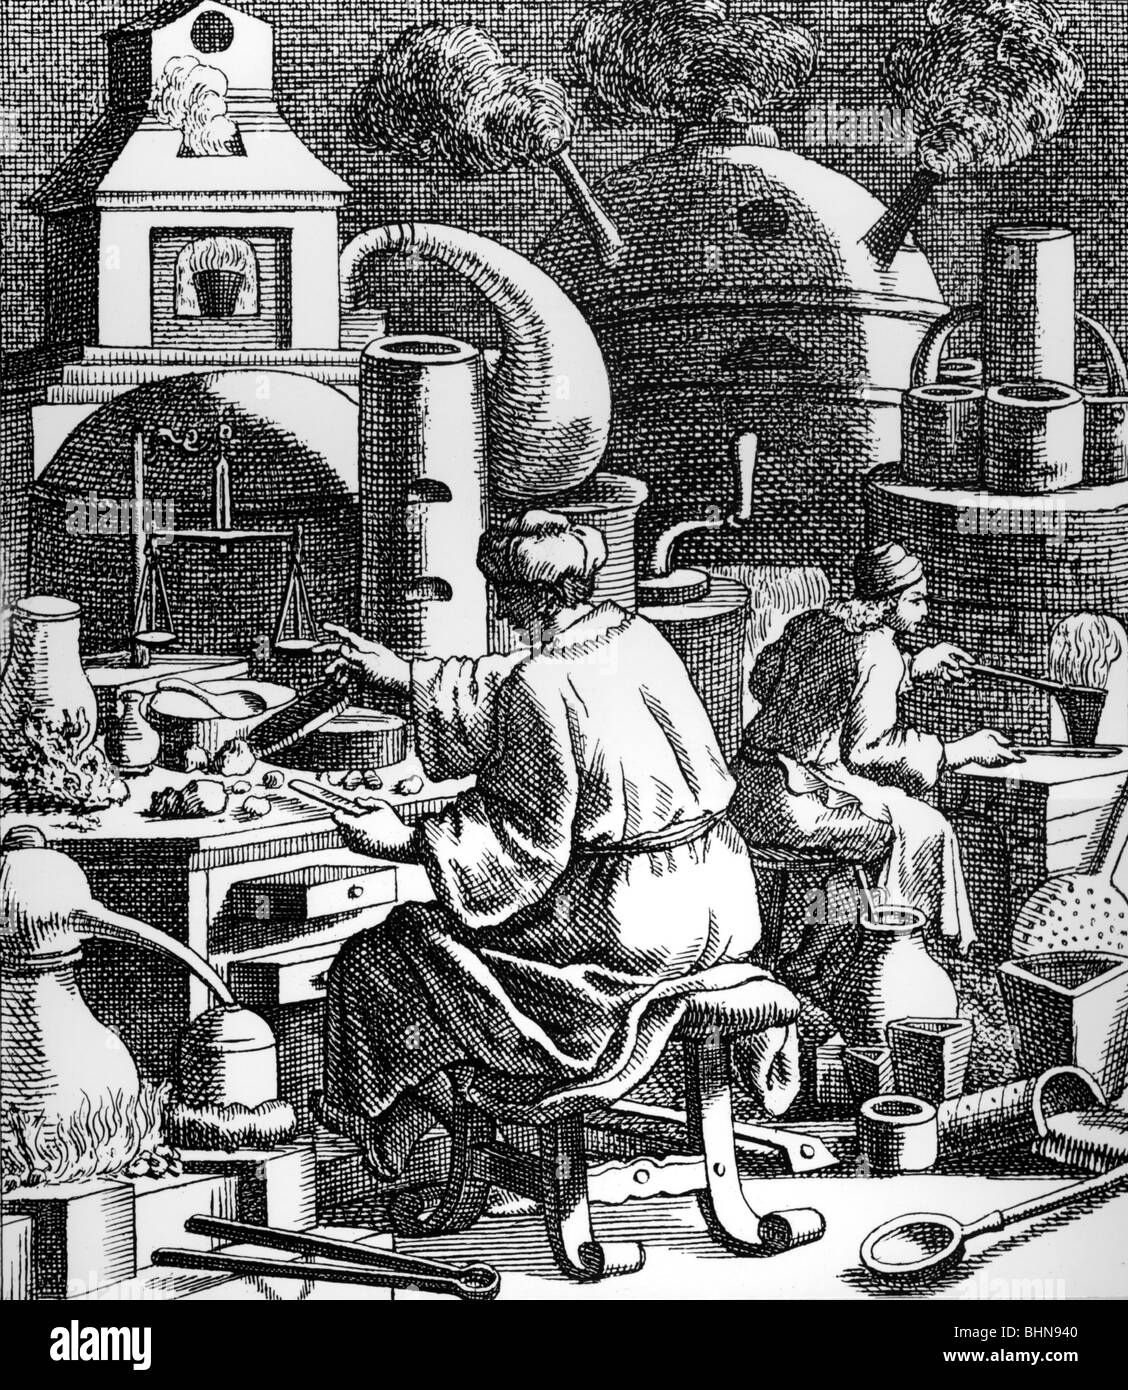 alchemy, laboratory, workshop of an alchemist in the Middle Ages, copper engraving, circa 17th century, historic, historical, alchemists, lab, laboratory, labs, laboratories, forensic science laboratory, assistant, assistants, alchemistic, alchemistical oven, tools, kitchen, medieval, people, Stock Photo